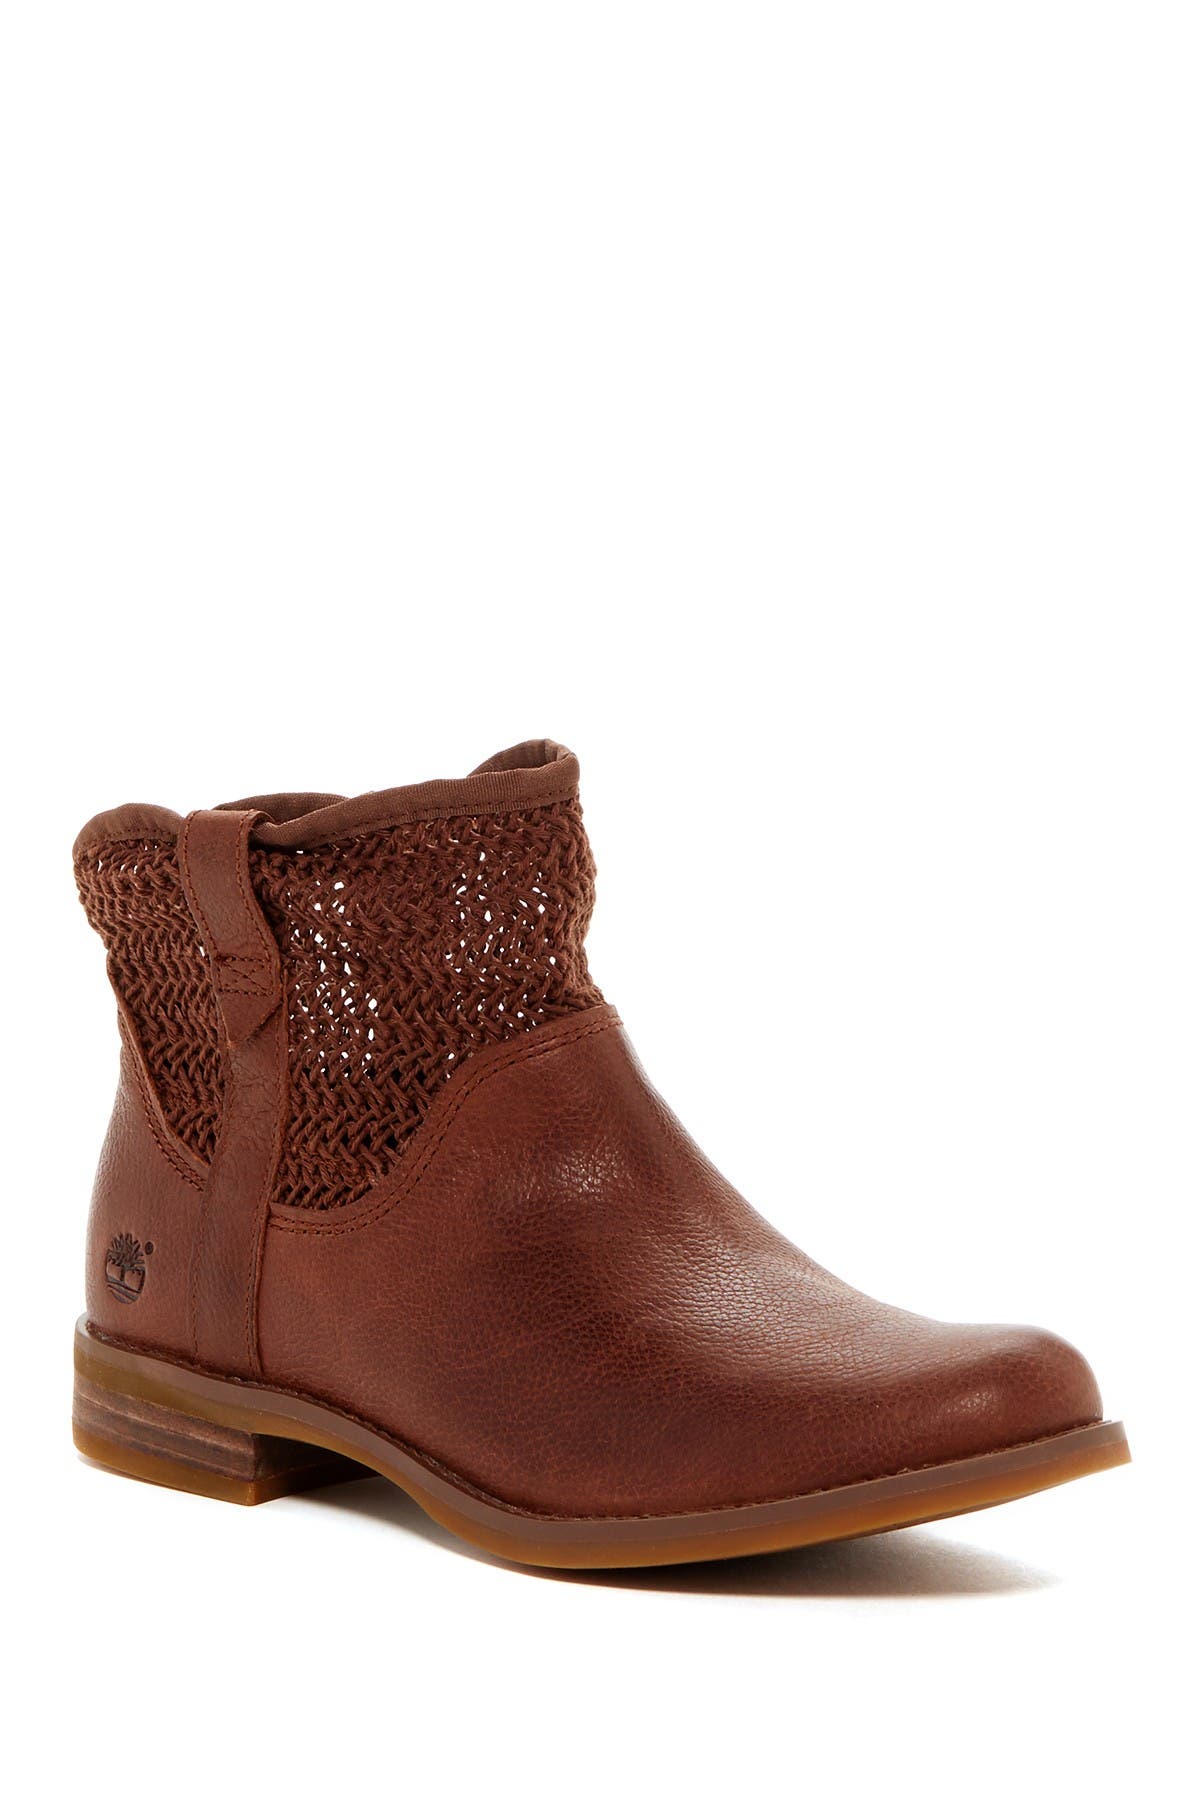 Timberland | Savin Hill Ankle Boot 